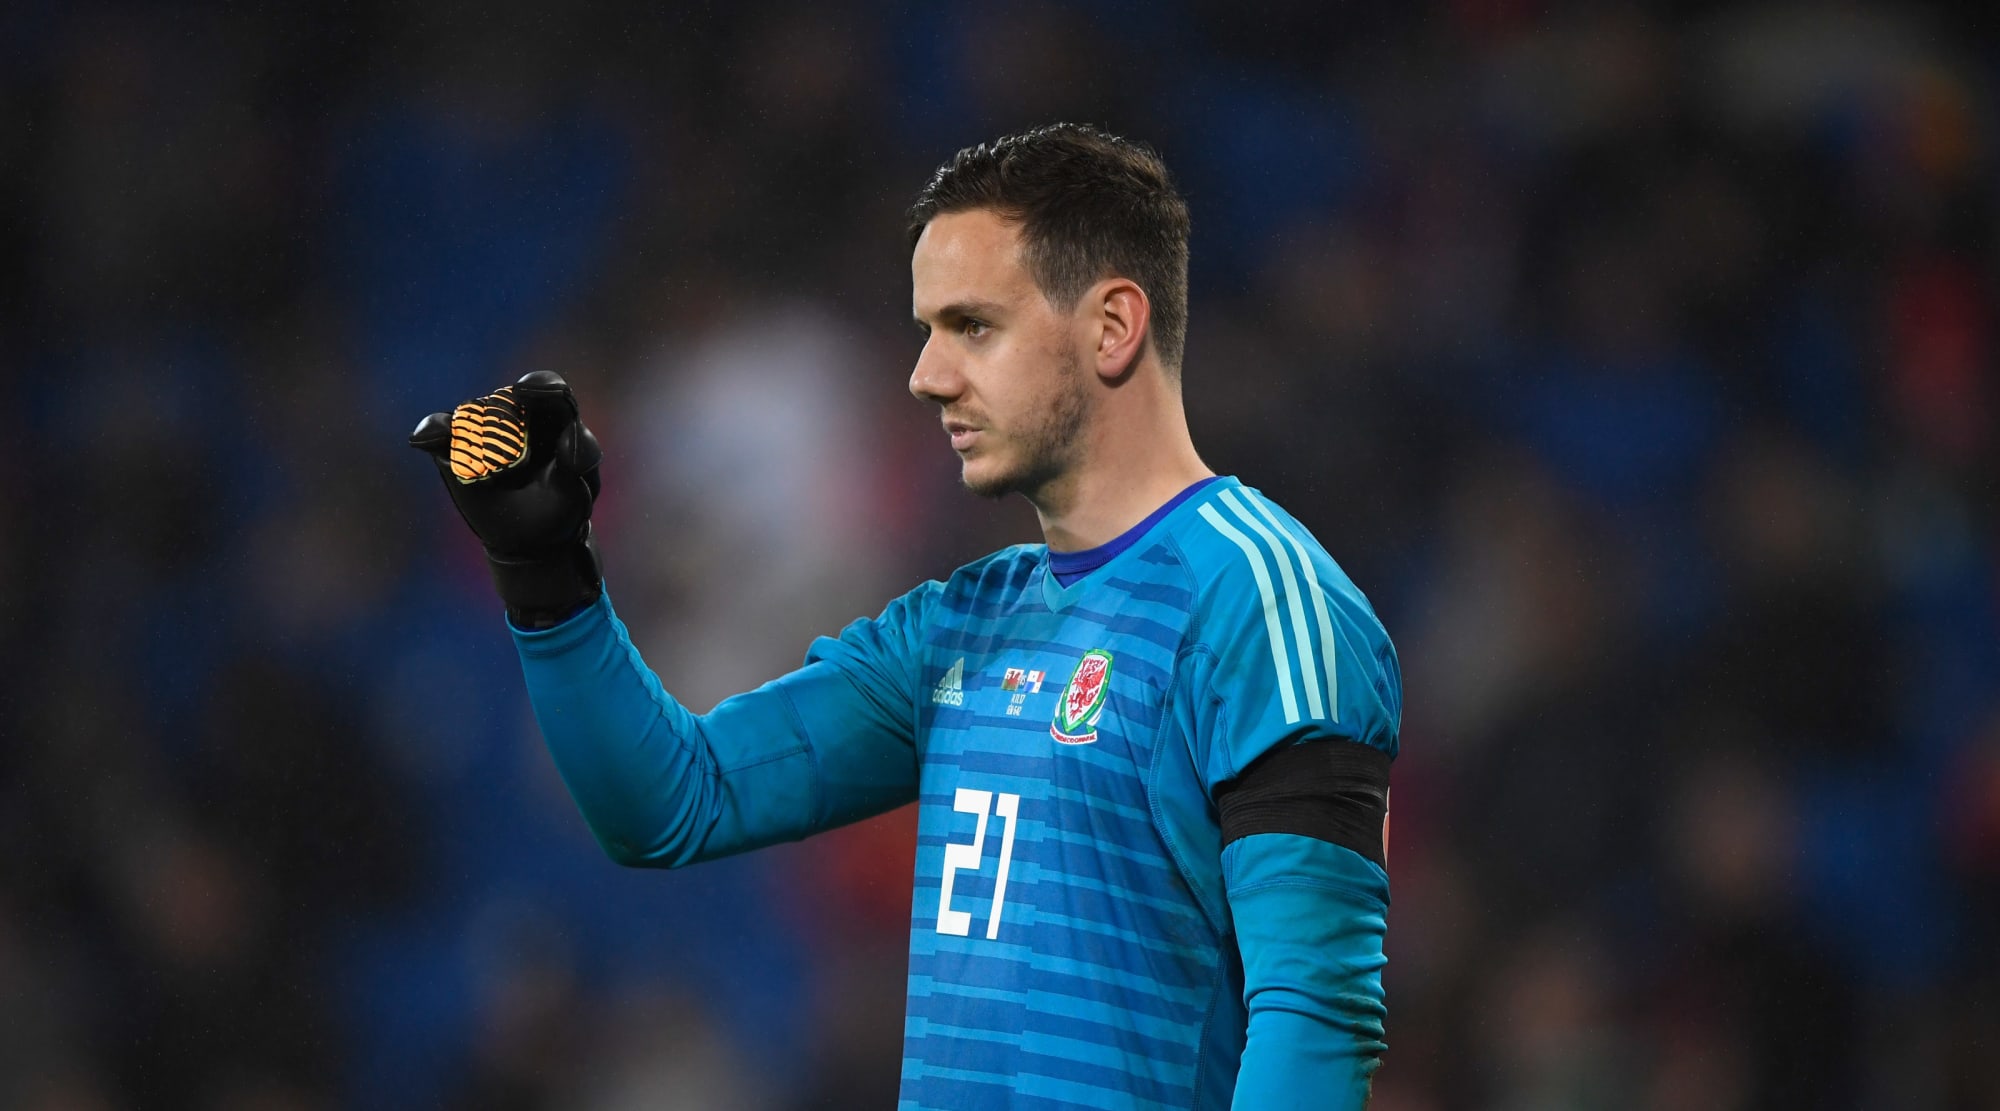 Leicester City sign Danny Ward from Liverpool